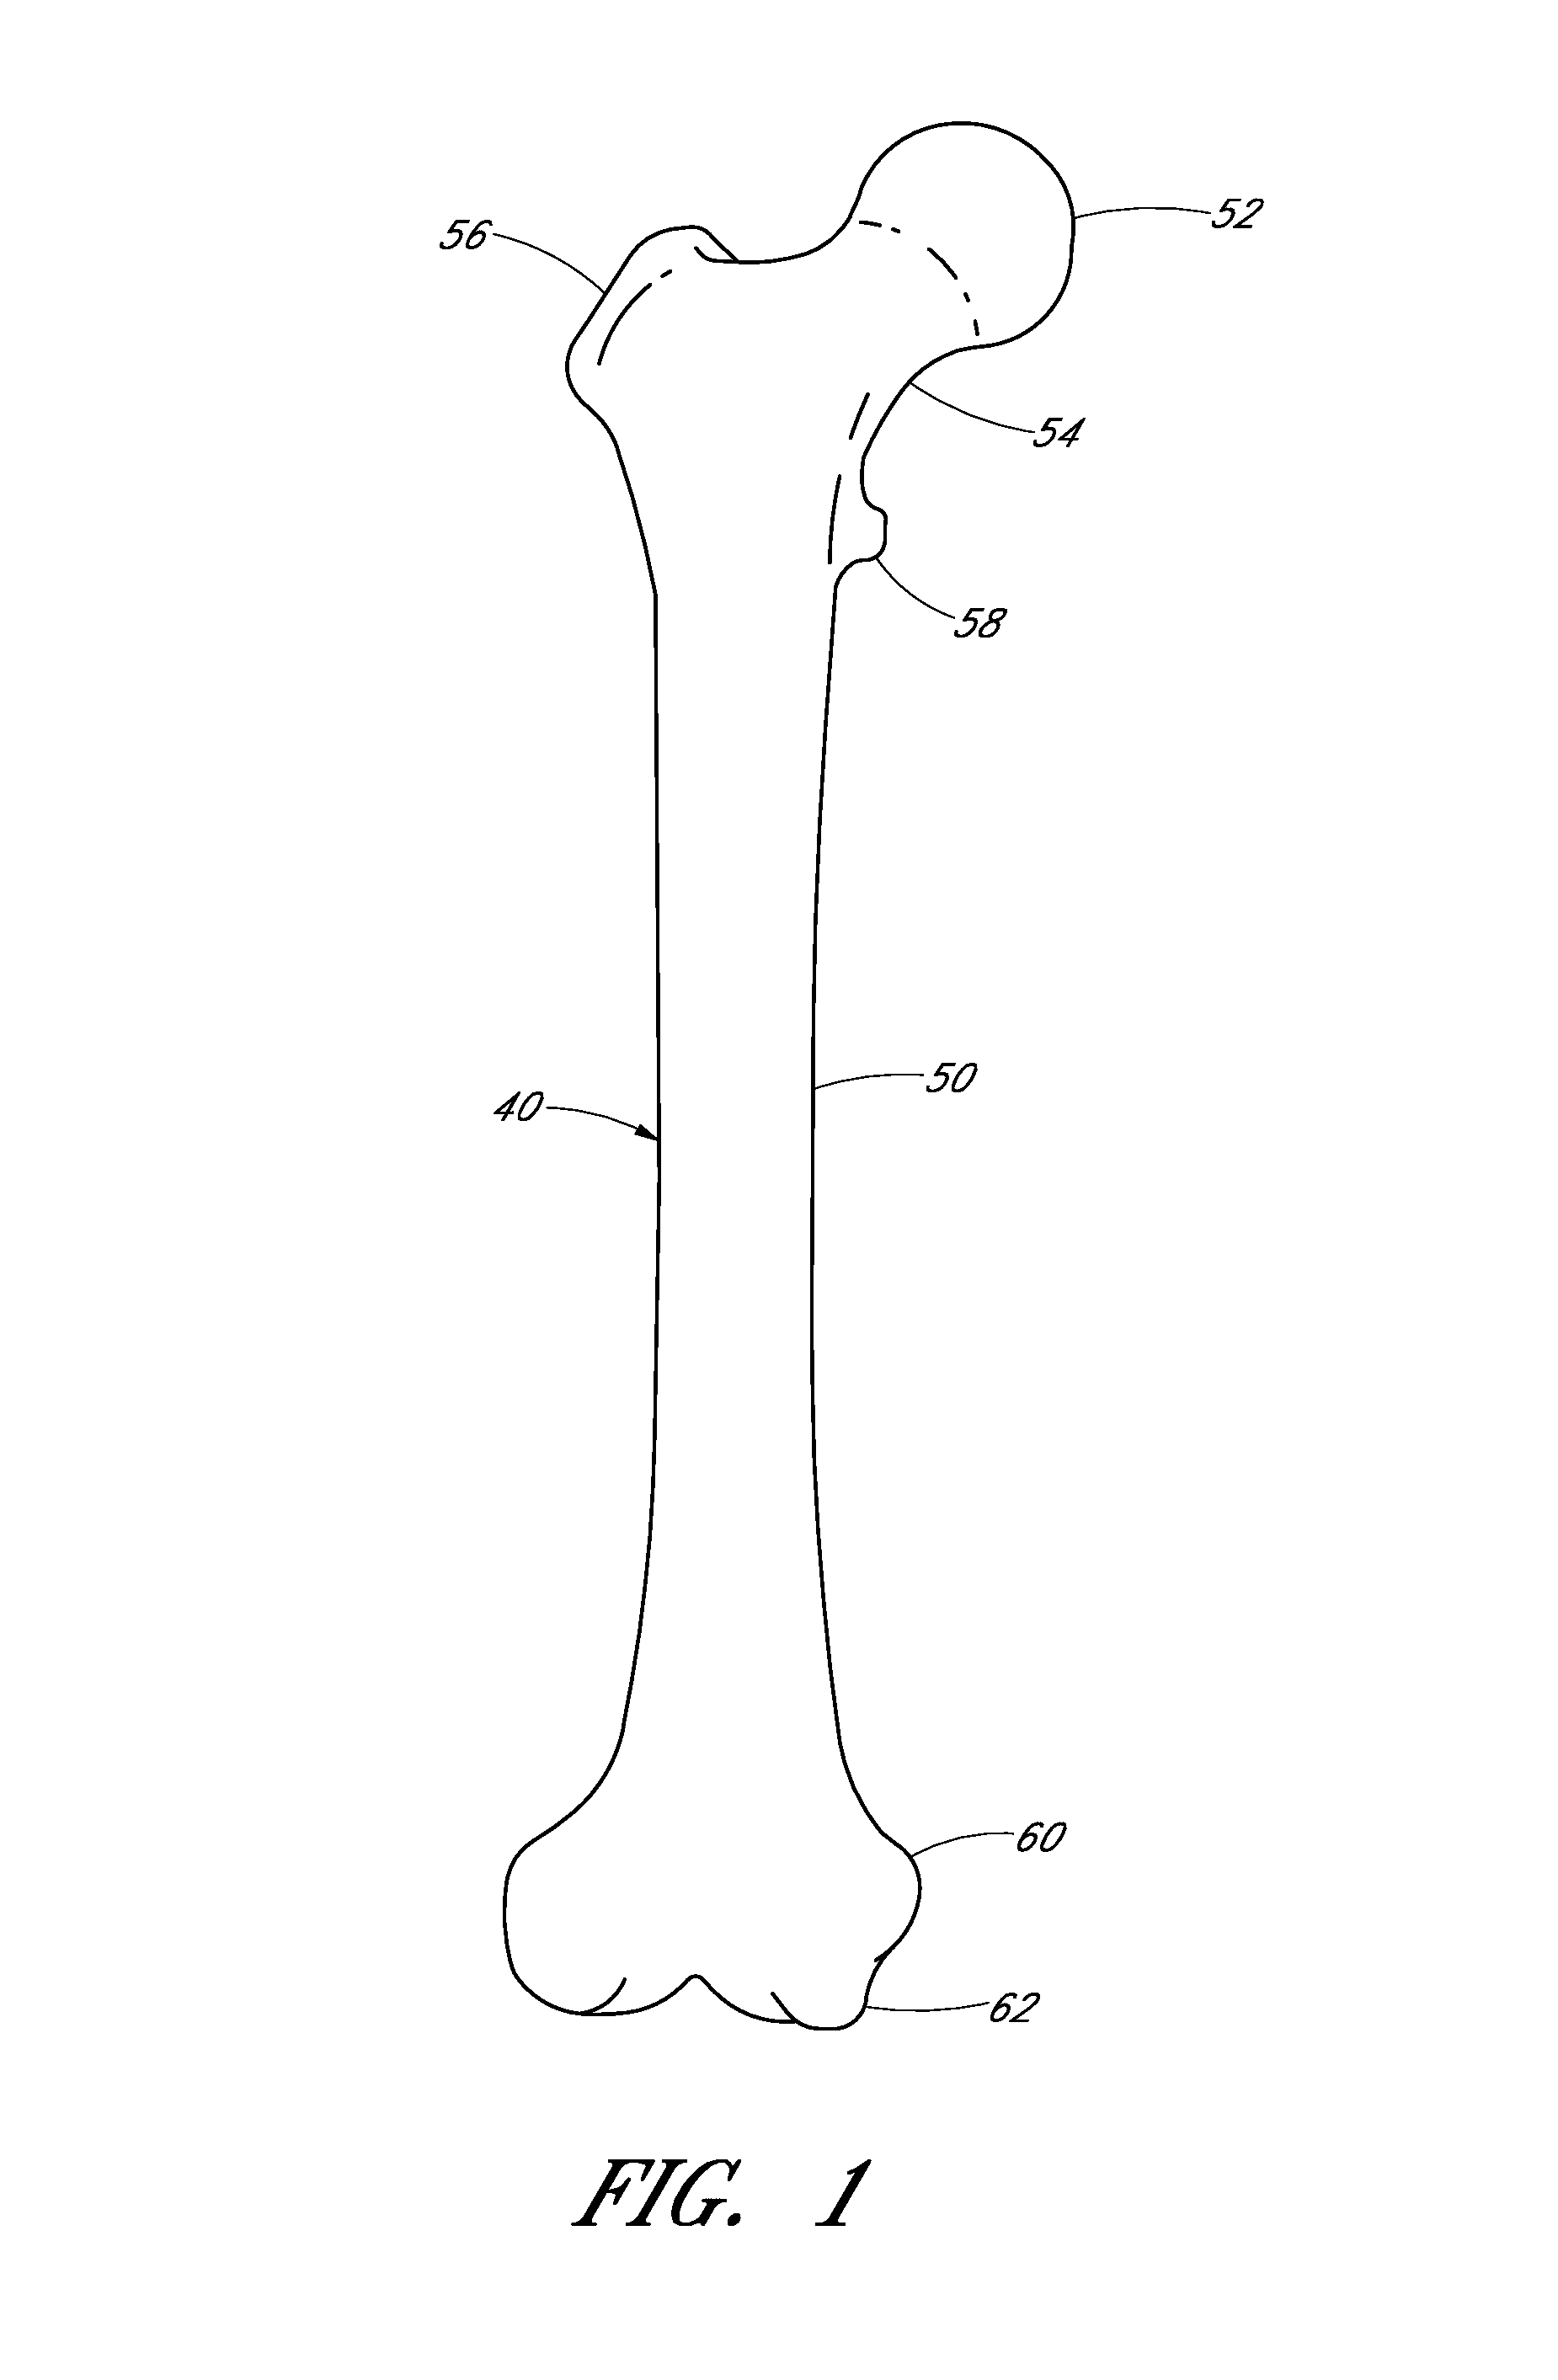 Intramedullary linkage device, system, and method for implantation